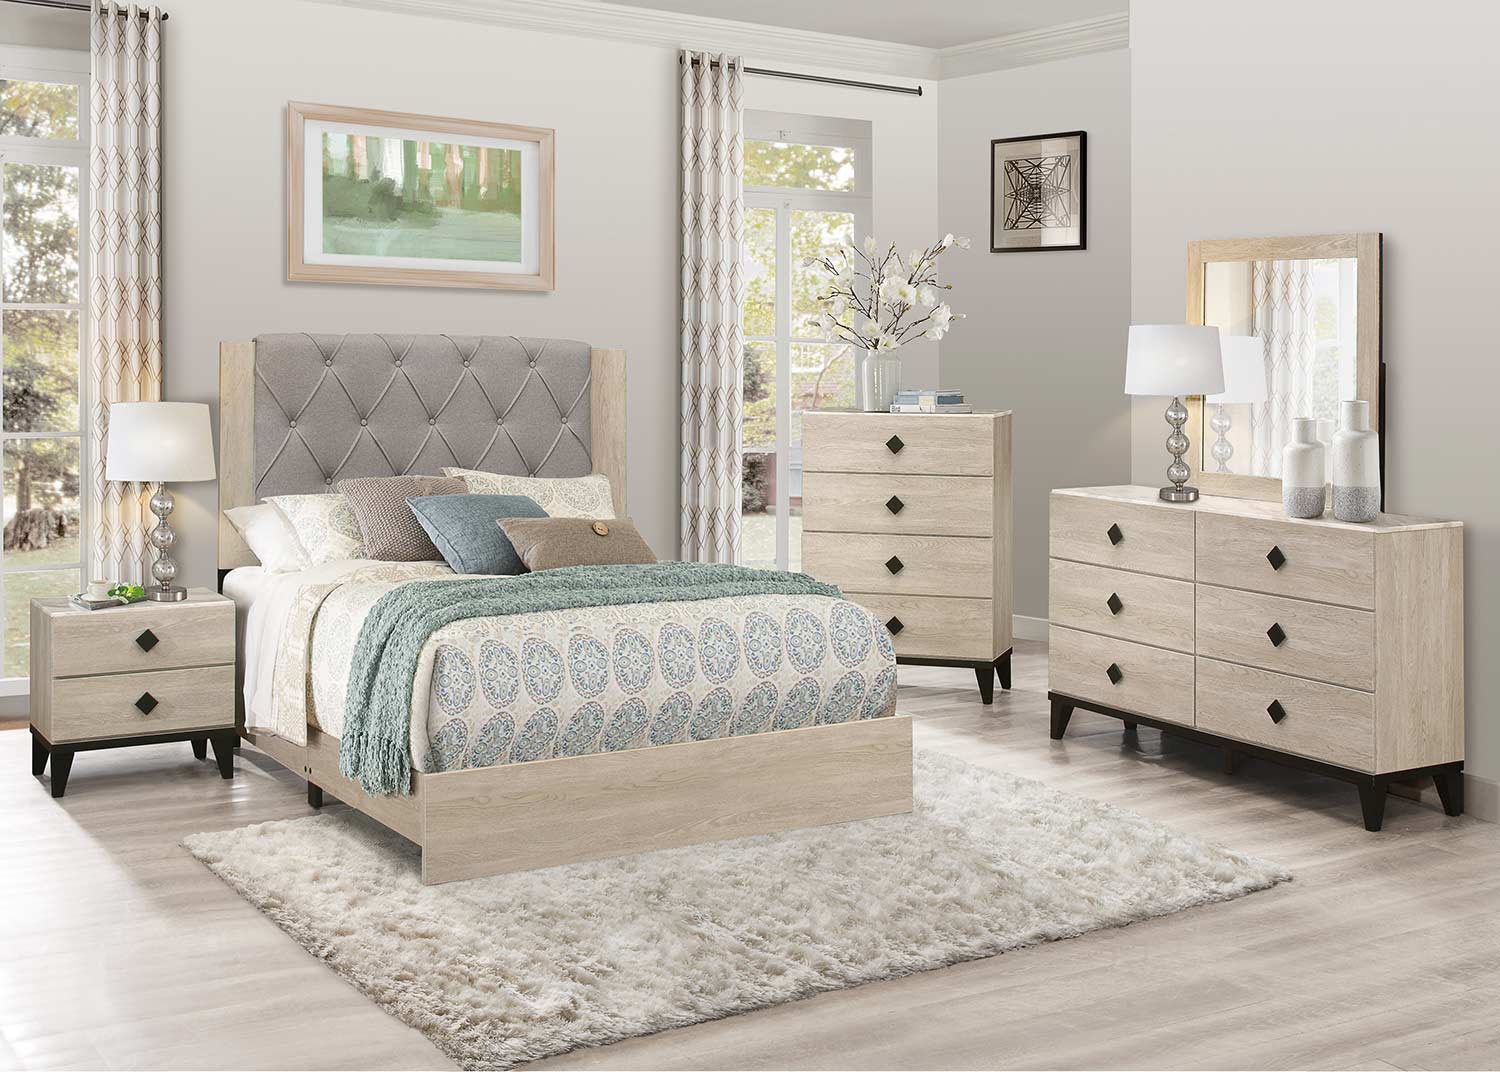 Homelegance Whiting Low Profile Bedroom Set - Cream and Black